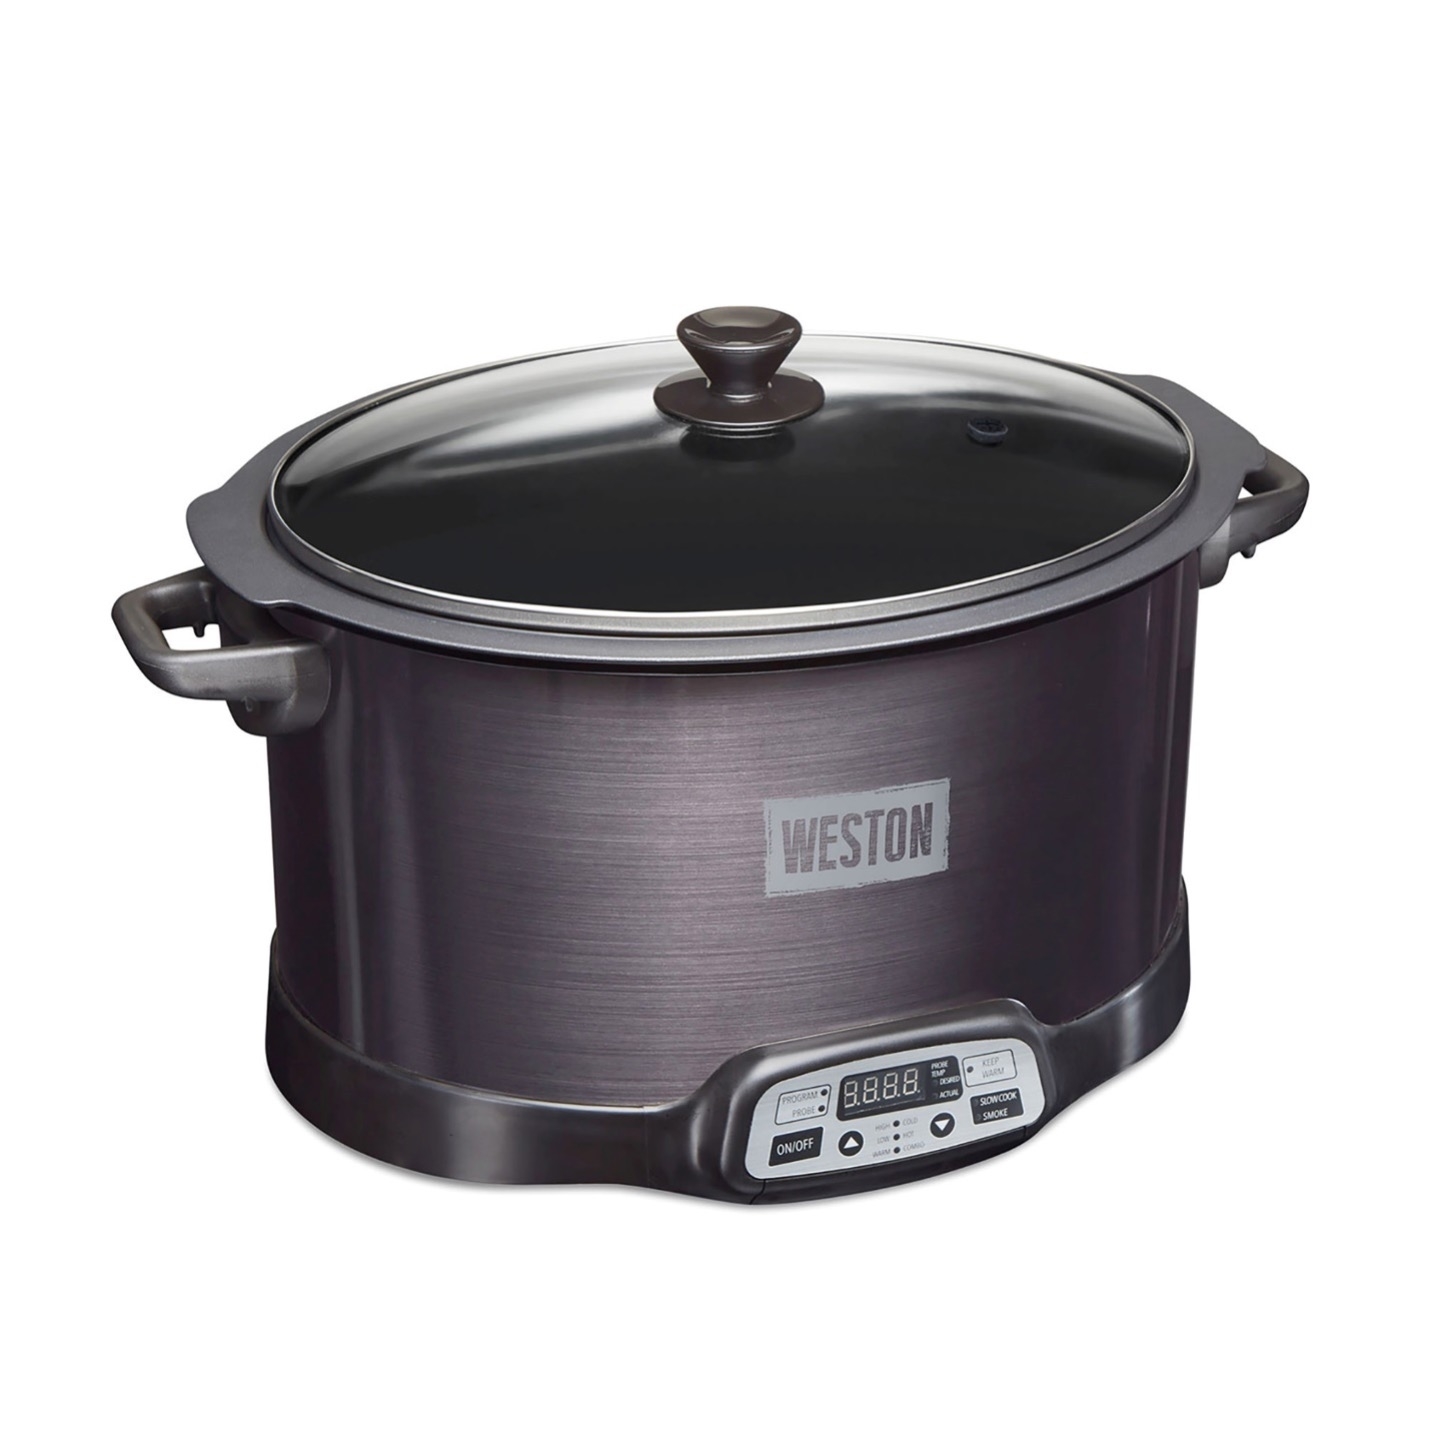 Product image of slow cooker